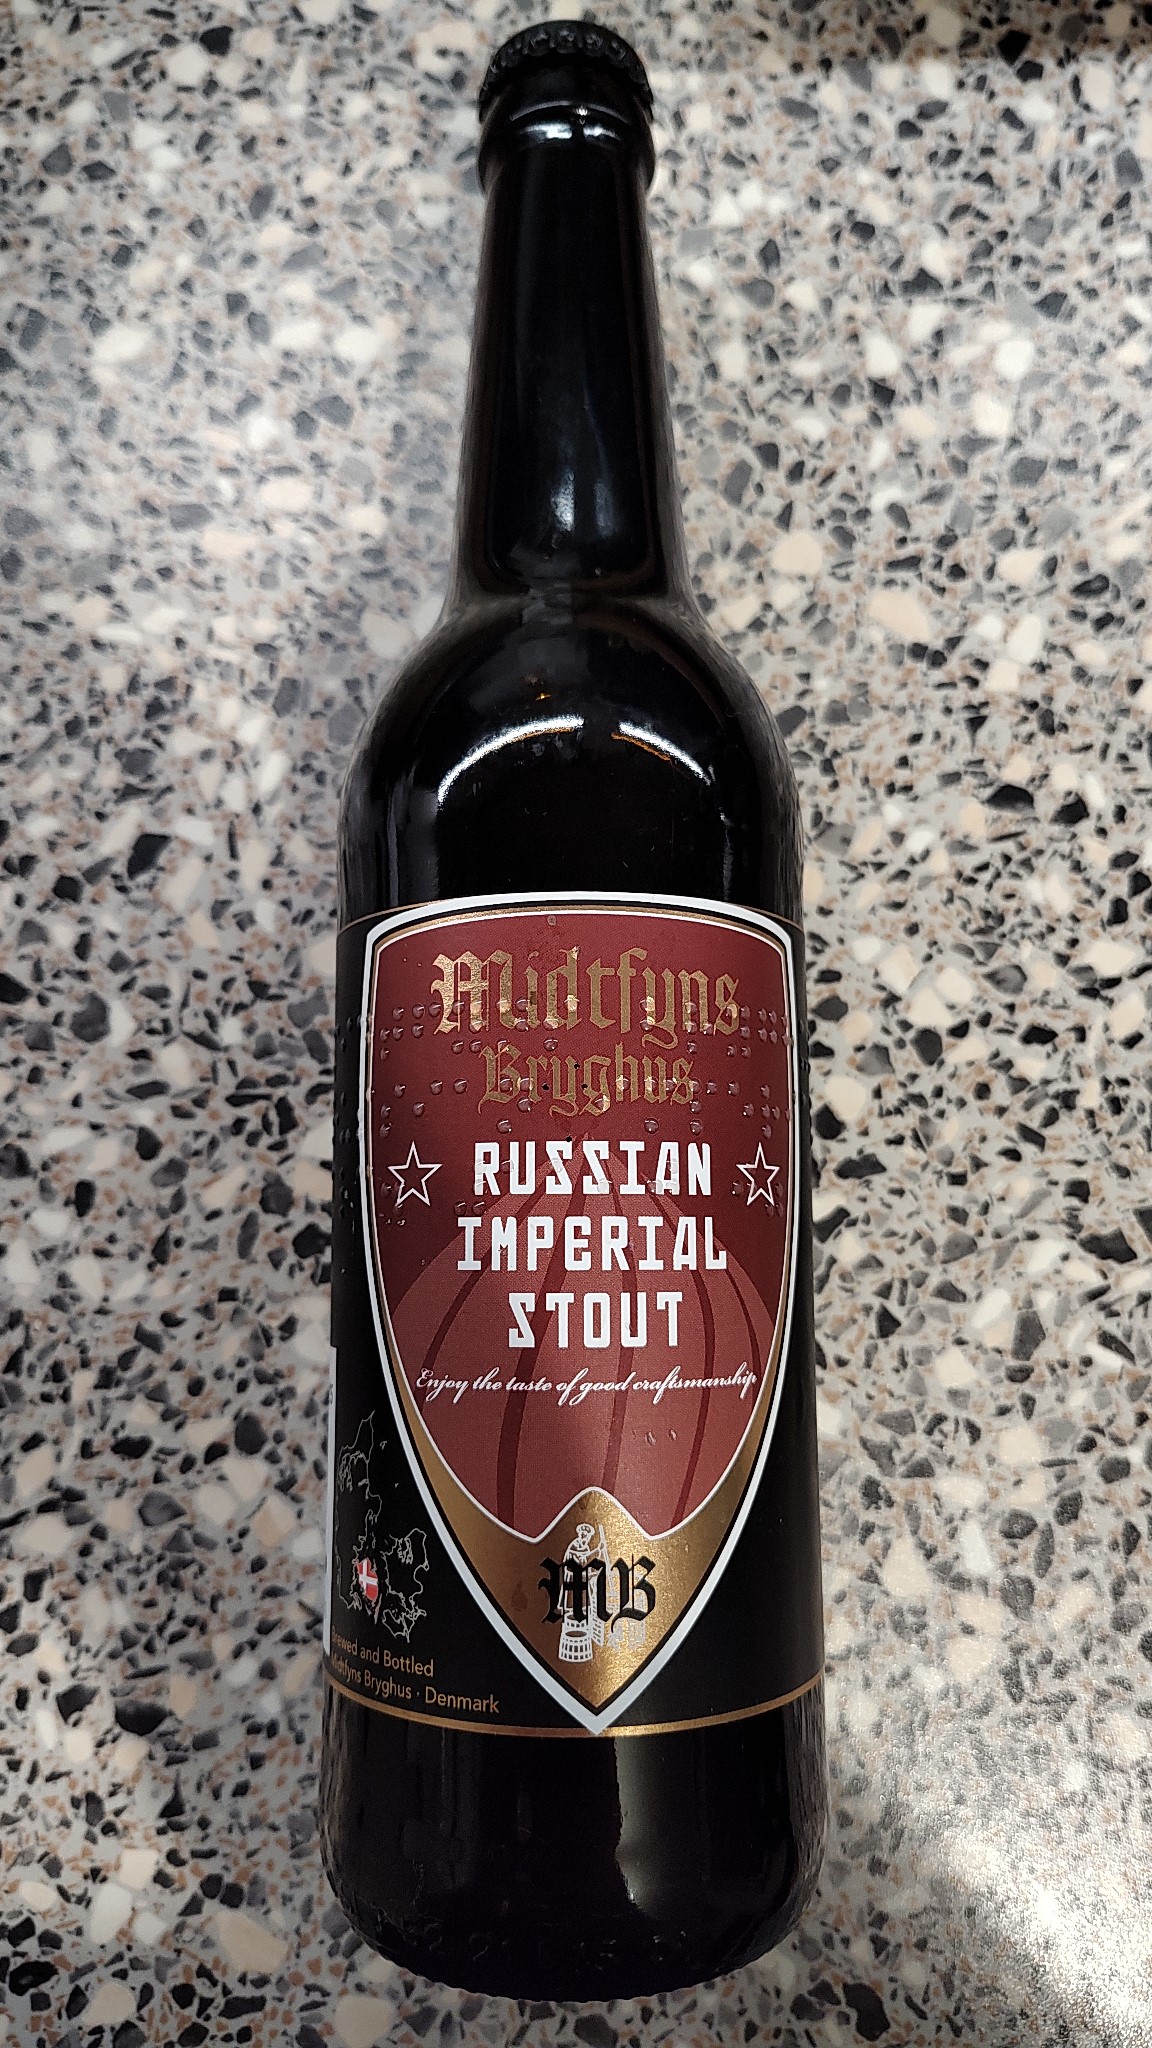 Midtfyns Bryghus - Russian Imperial Stout